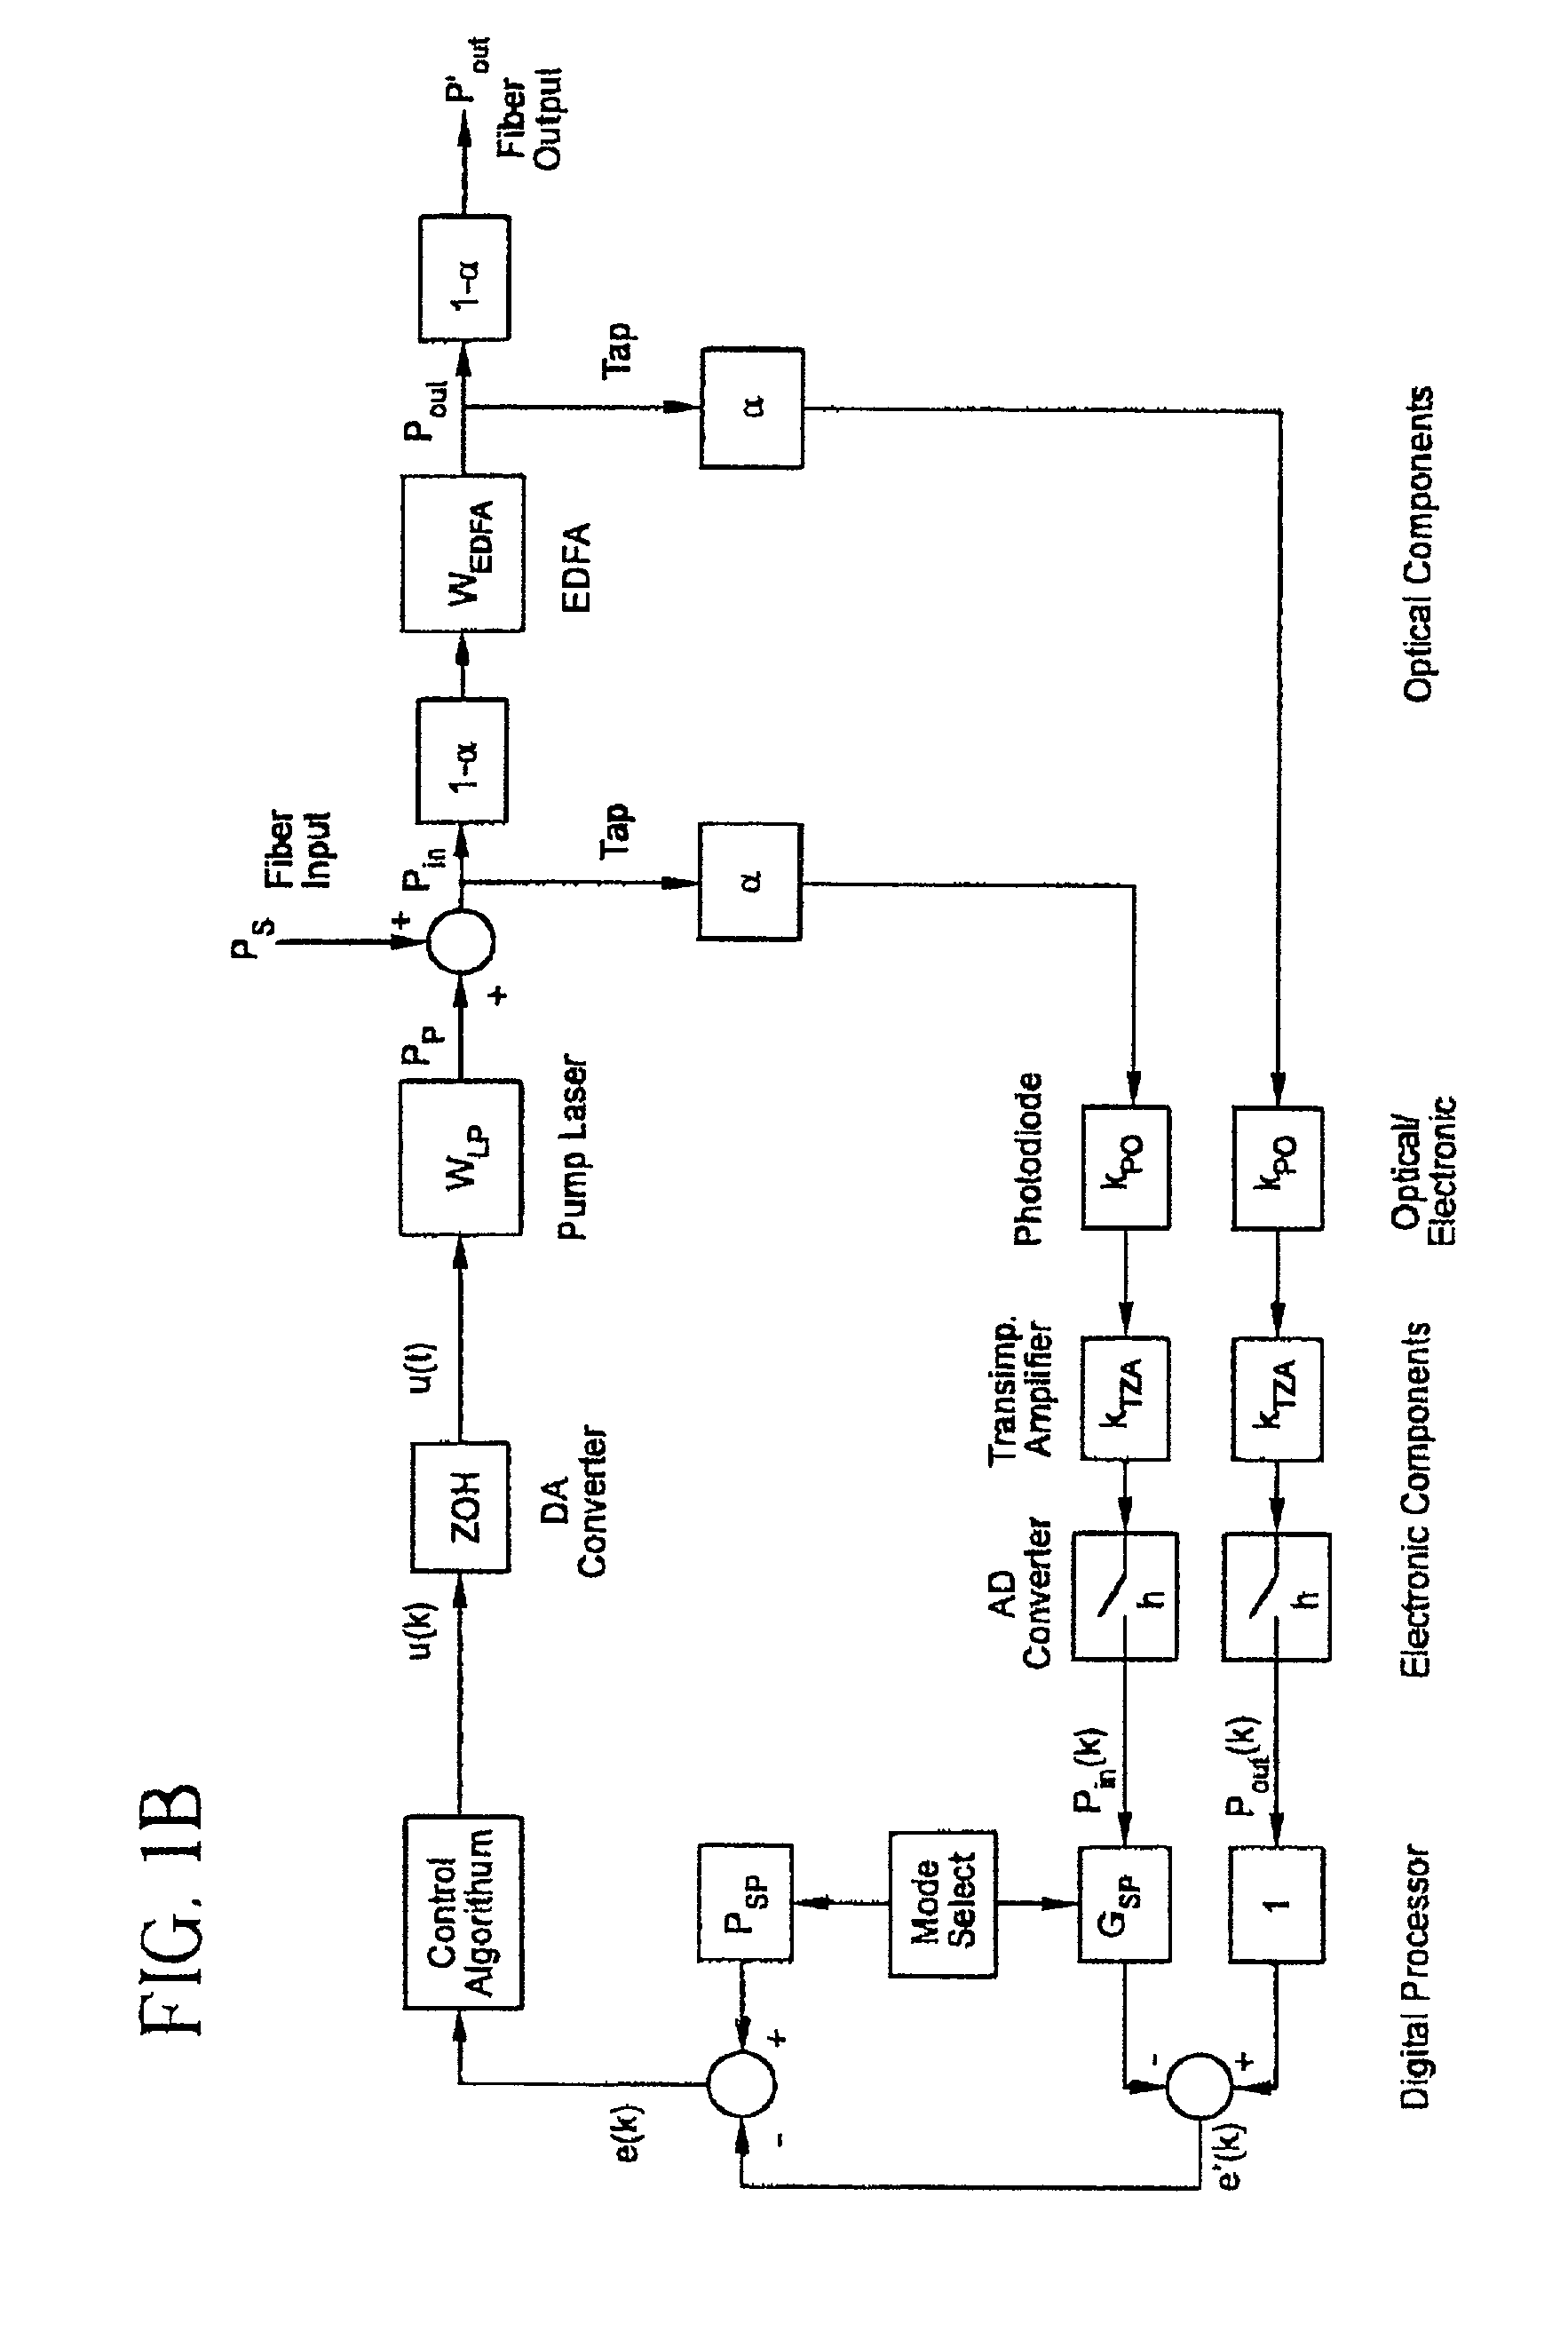 Optical amplifiers with a simple gain/output control device